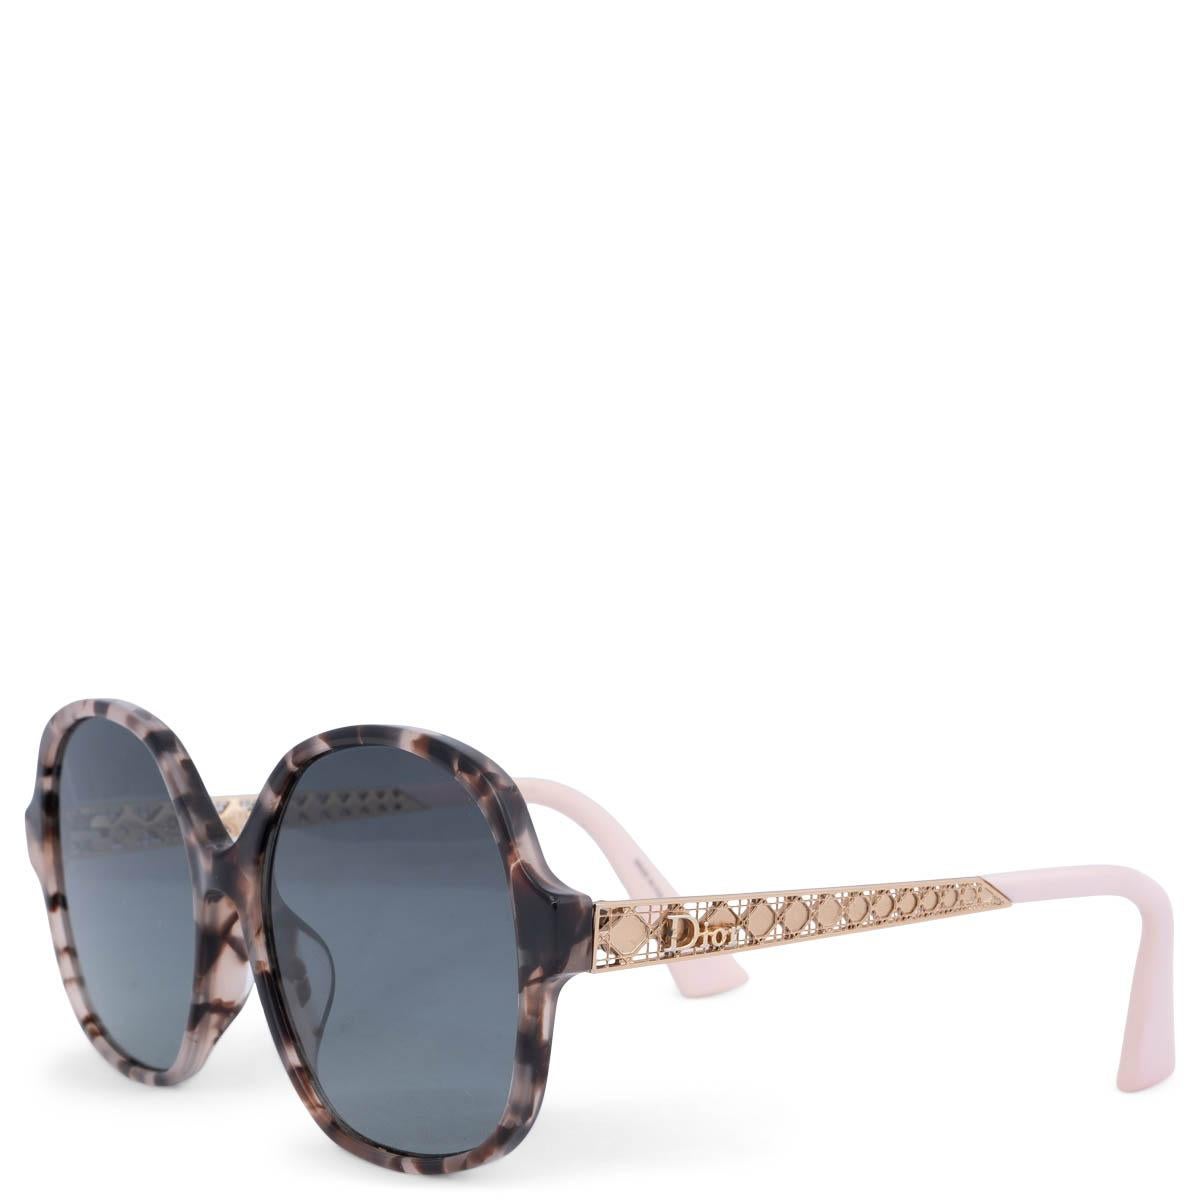 100% authentic Christian Dior Diorama-8F sunglasses in havana and pink tortoise acetate whit gold-tone details and gradient havana and pink lenses. Have been worn and are in excellent condition. Come with case.

Measurements
Model	Christian Dior